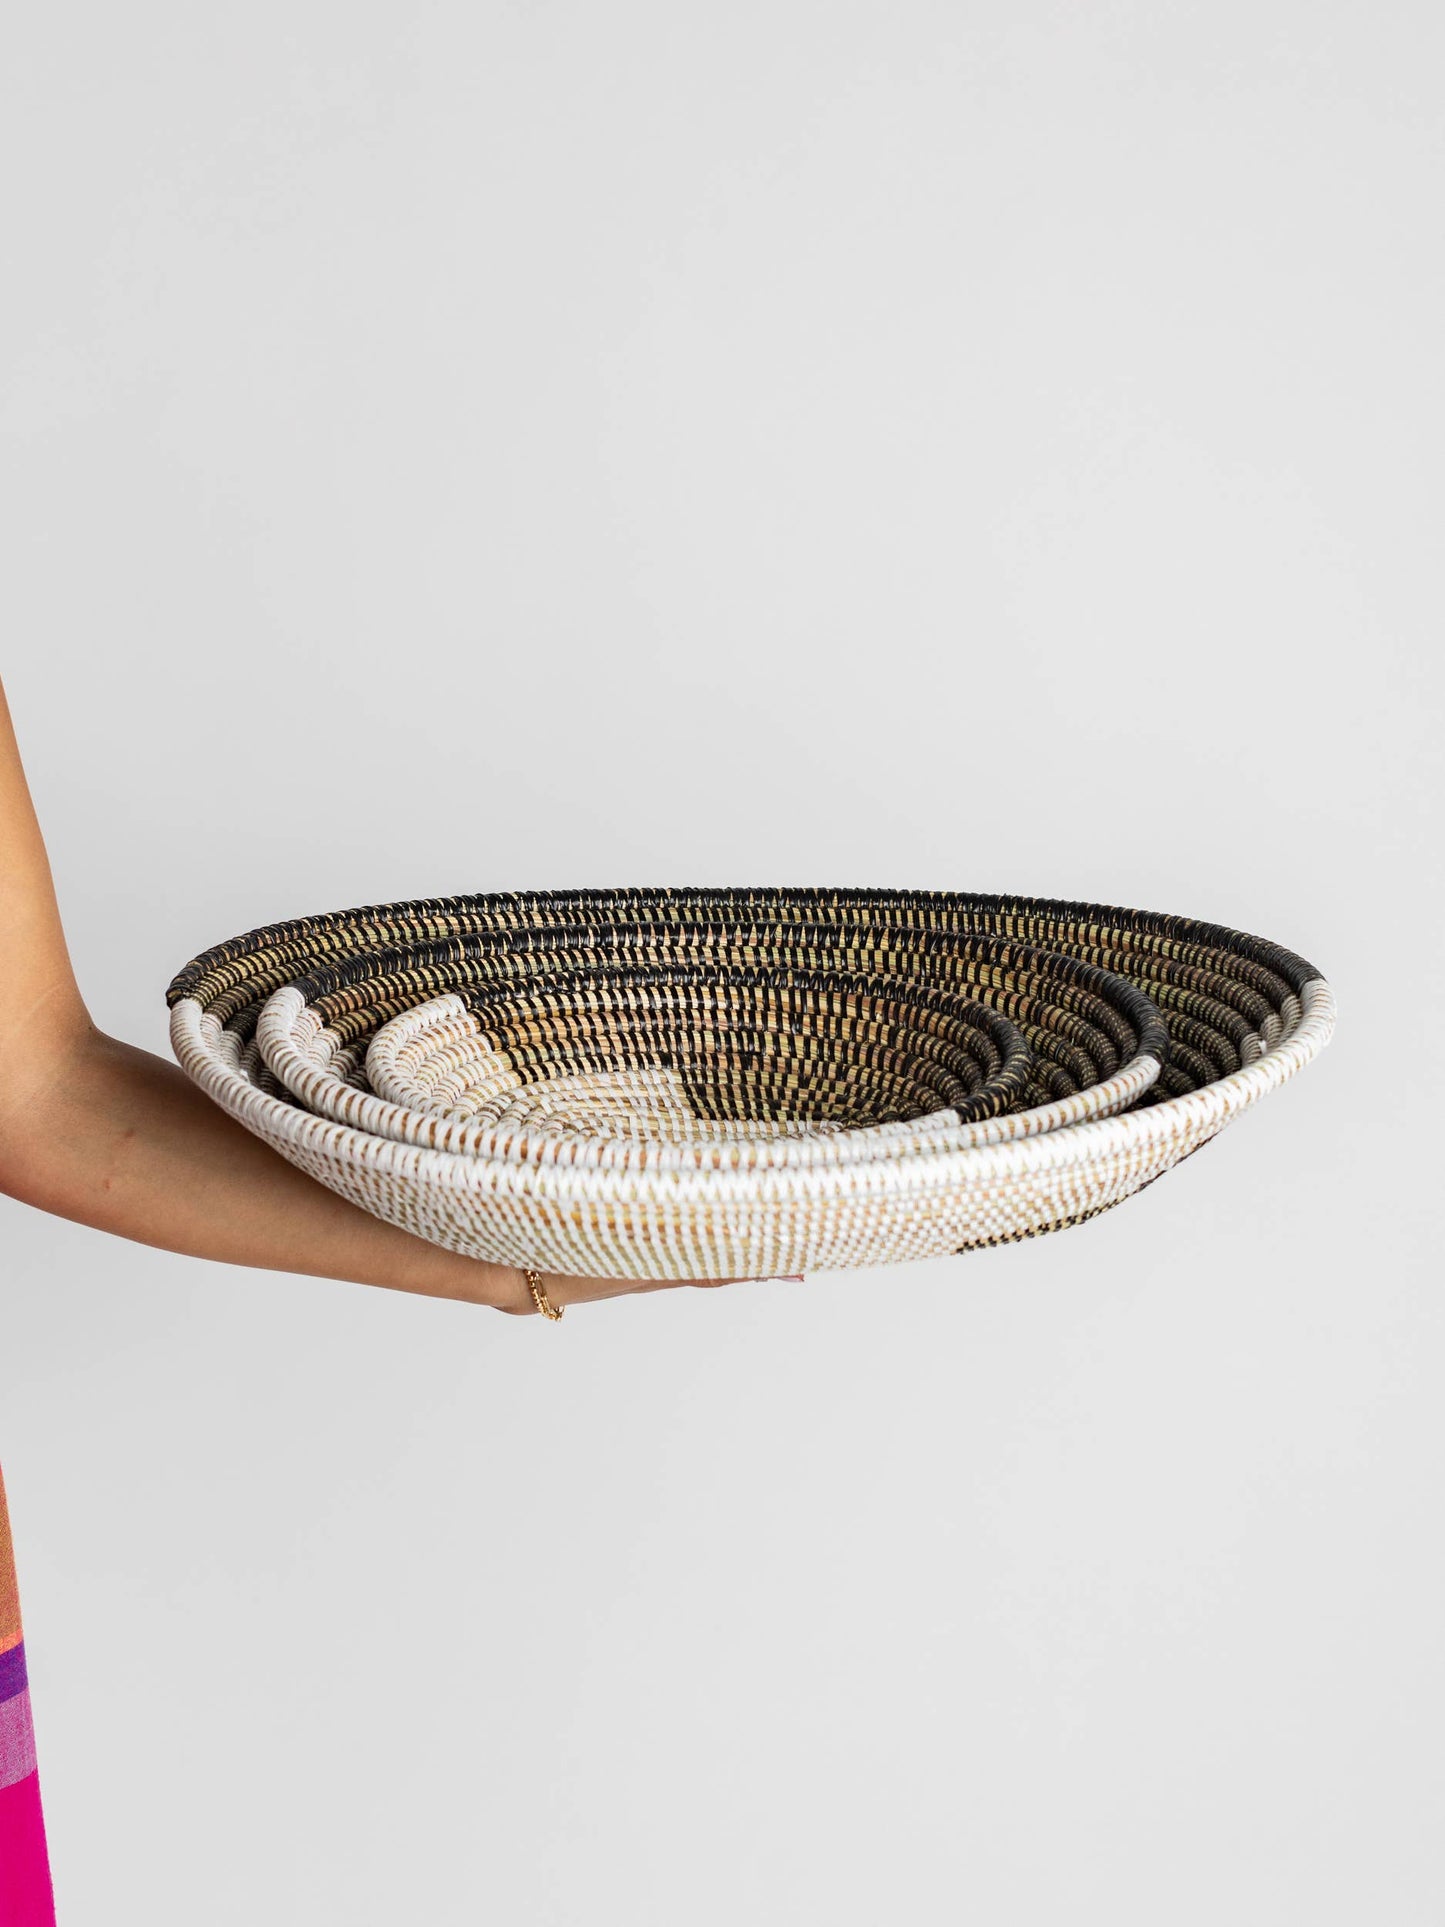 Handwoven Tray - Large